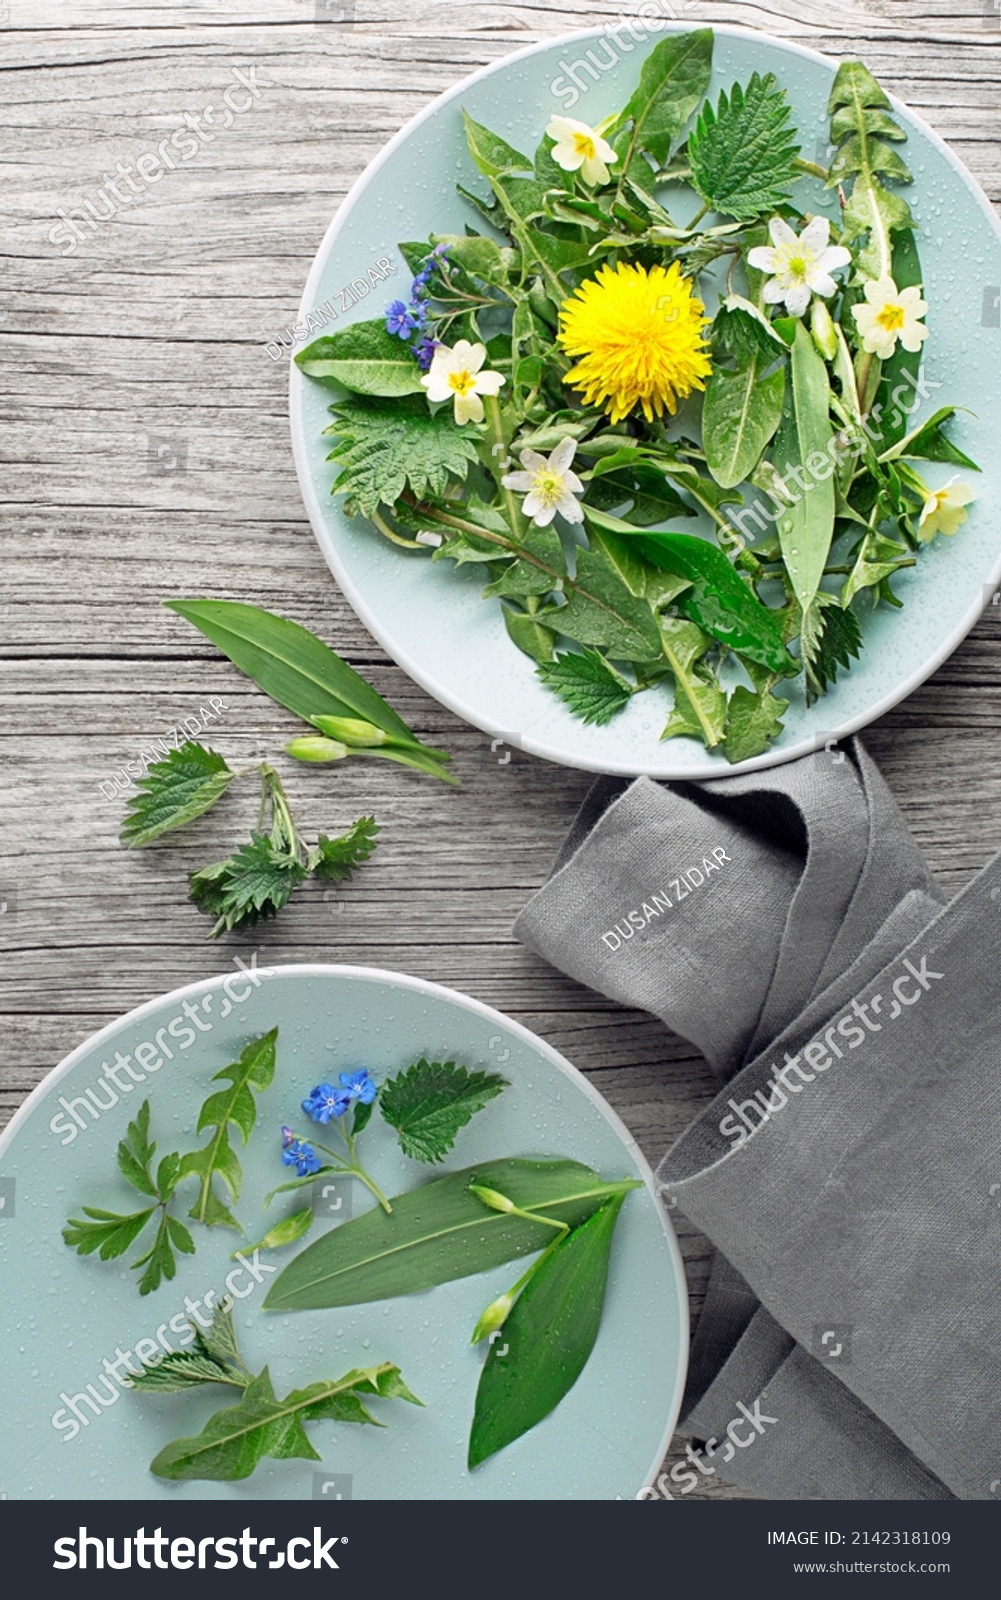 Healthy spring plants for food ingredients. Dandelion, wild garlic, flowers and nettle background #2142318109